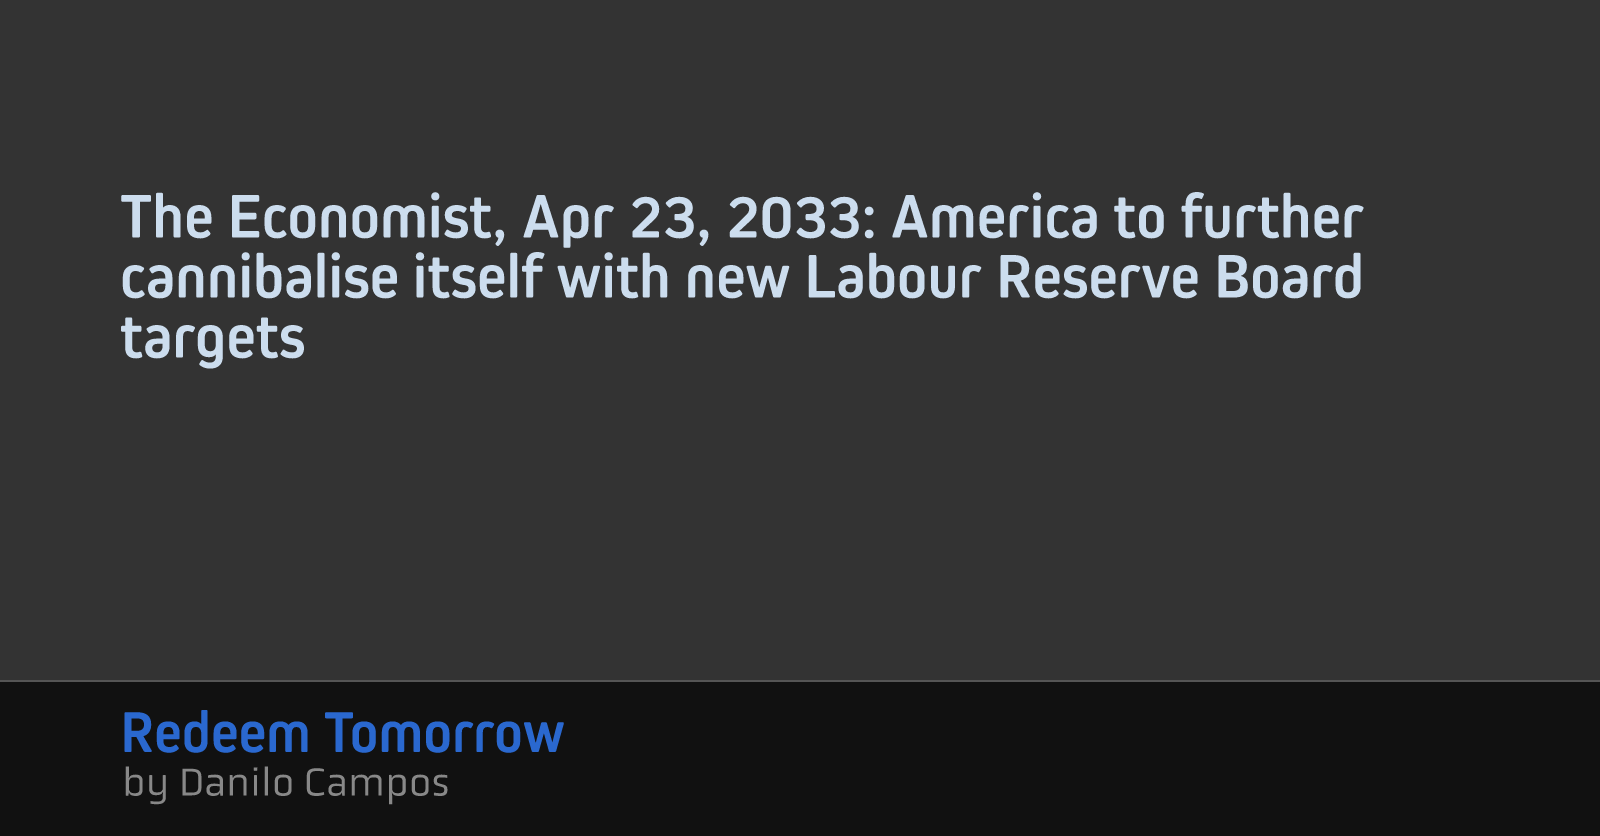 The Economist, Apr 23, 2033: America to further cannibalise itself with new Labour Reserve Board targets